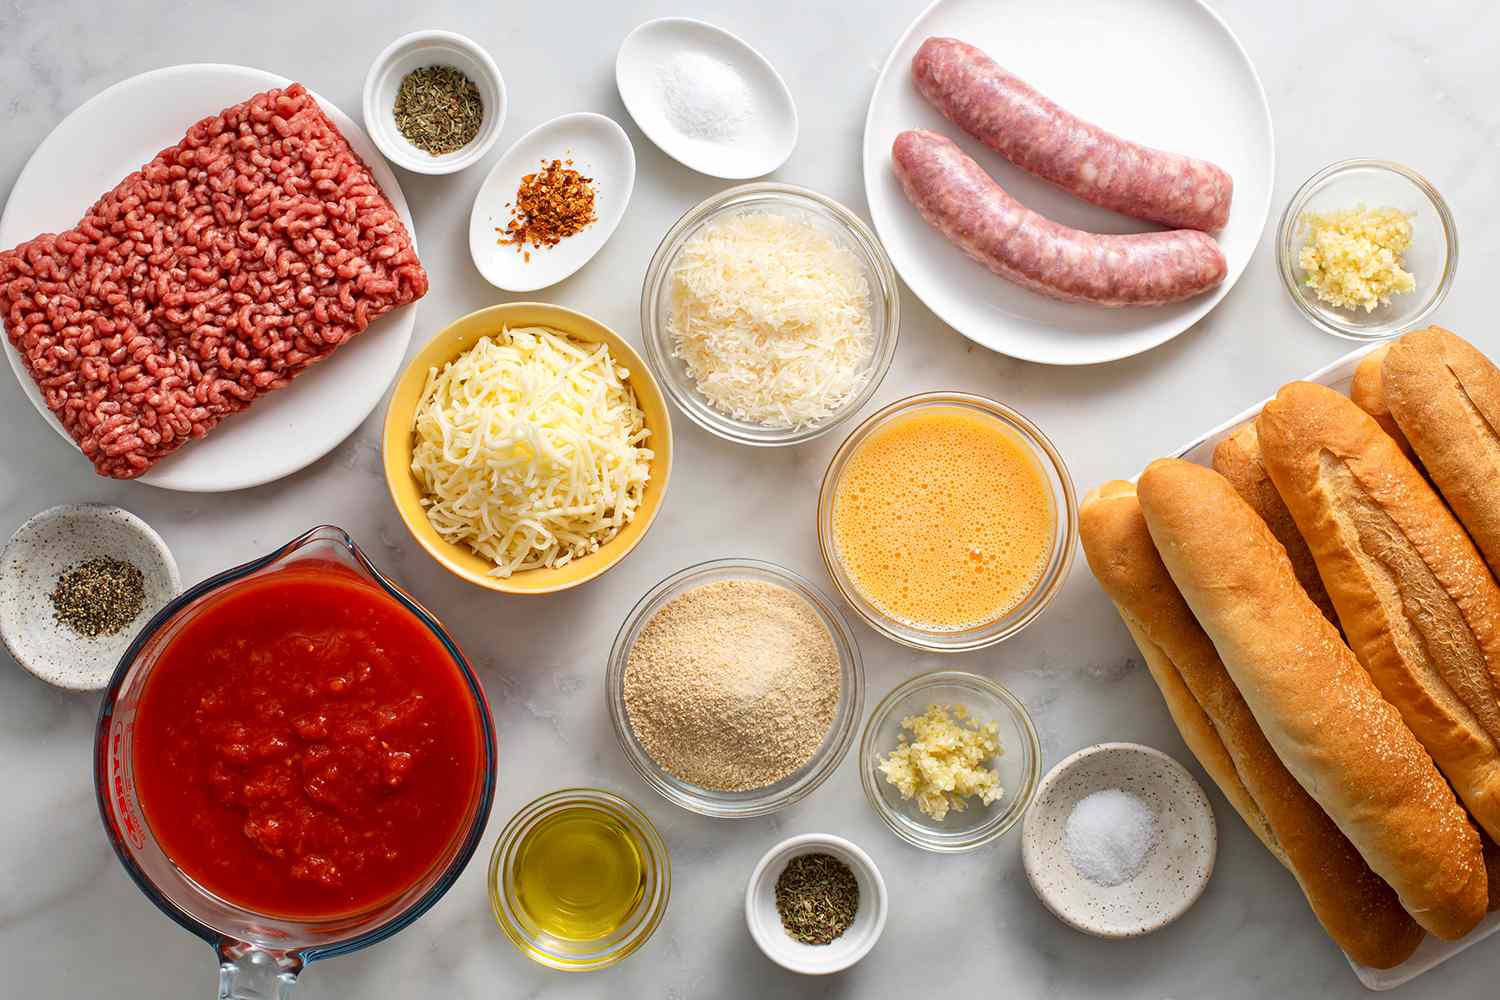 Ingredients to make meatball subs